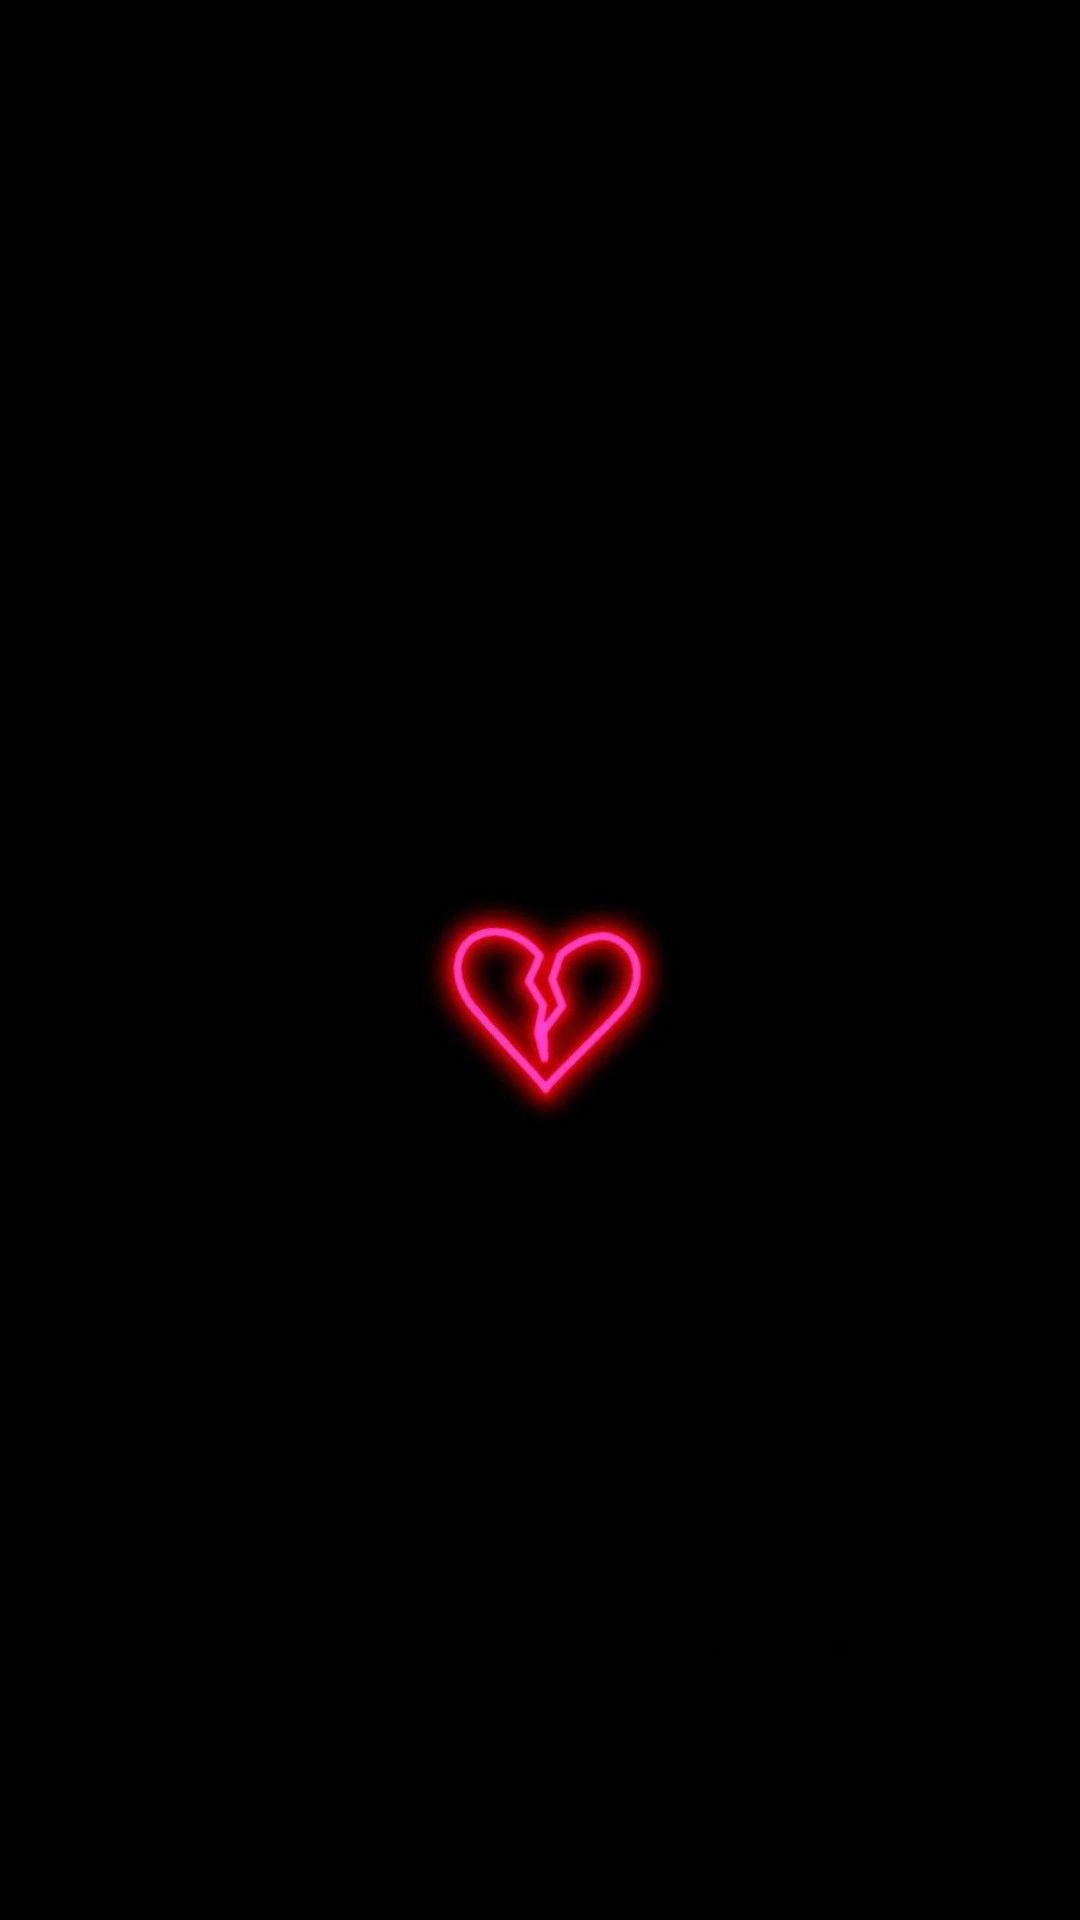 Black Heart With Red LED Wallpaper